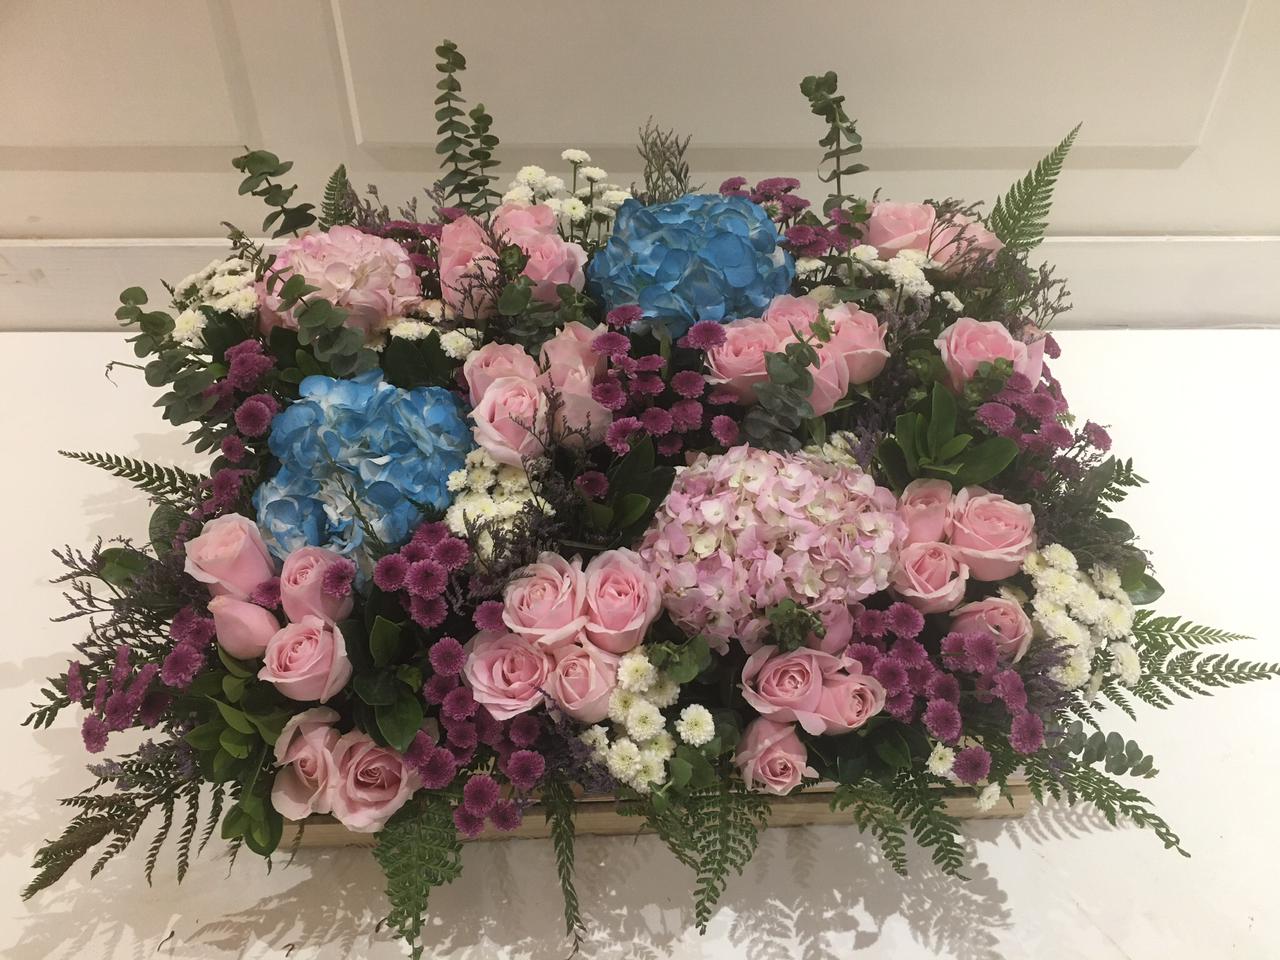 sunset floral delivery, Sector 93 Noida flowers, Noida flower delivery, sunset blooms, fresh flowers Noida, evening flowers delivery, Sector 93 floral service